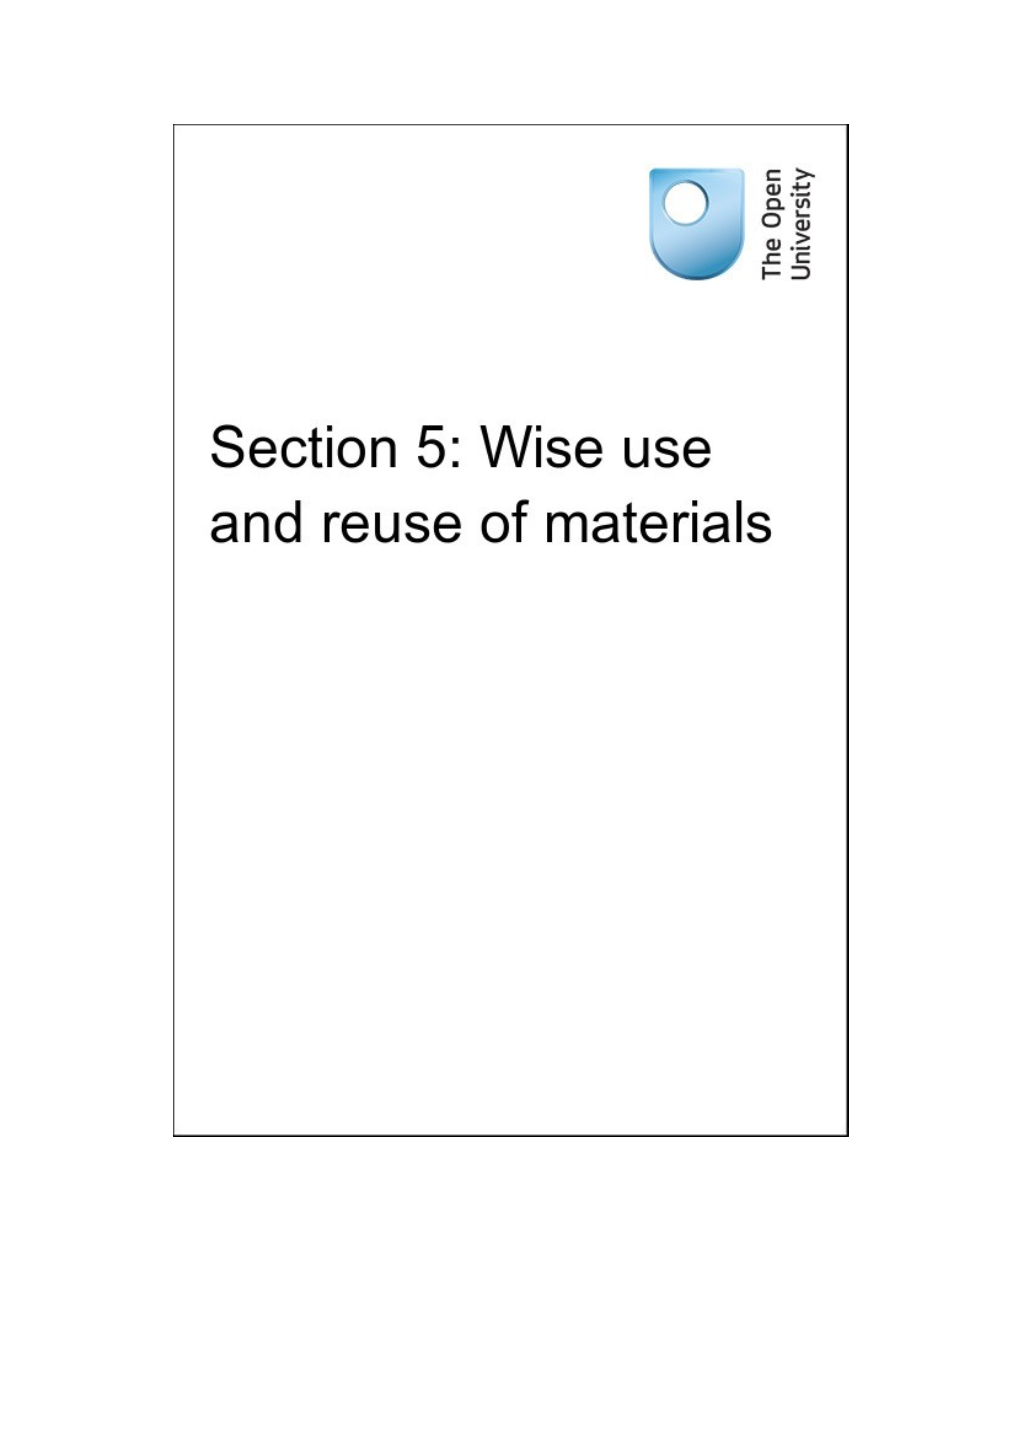 Section 5: Wise Use and Reuse of Materials